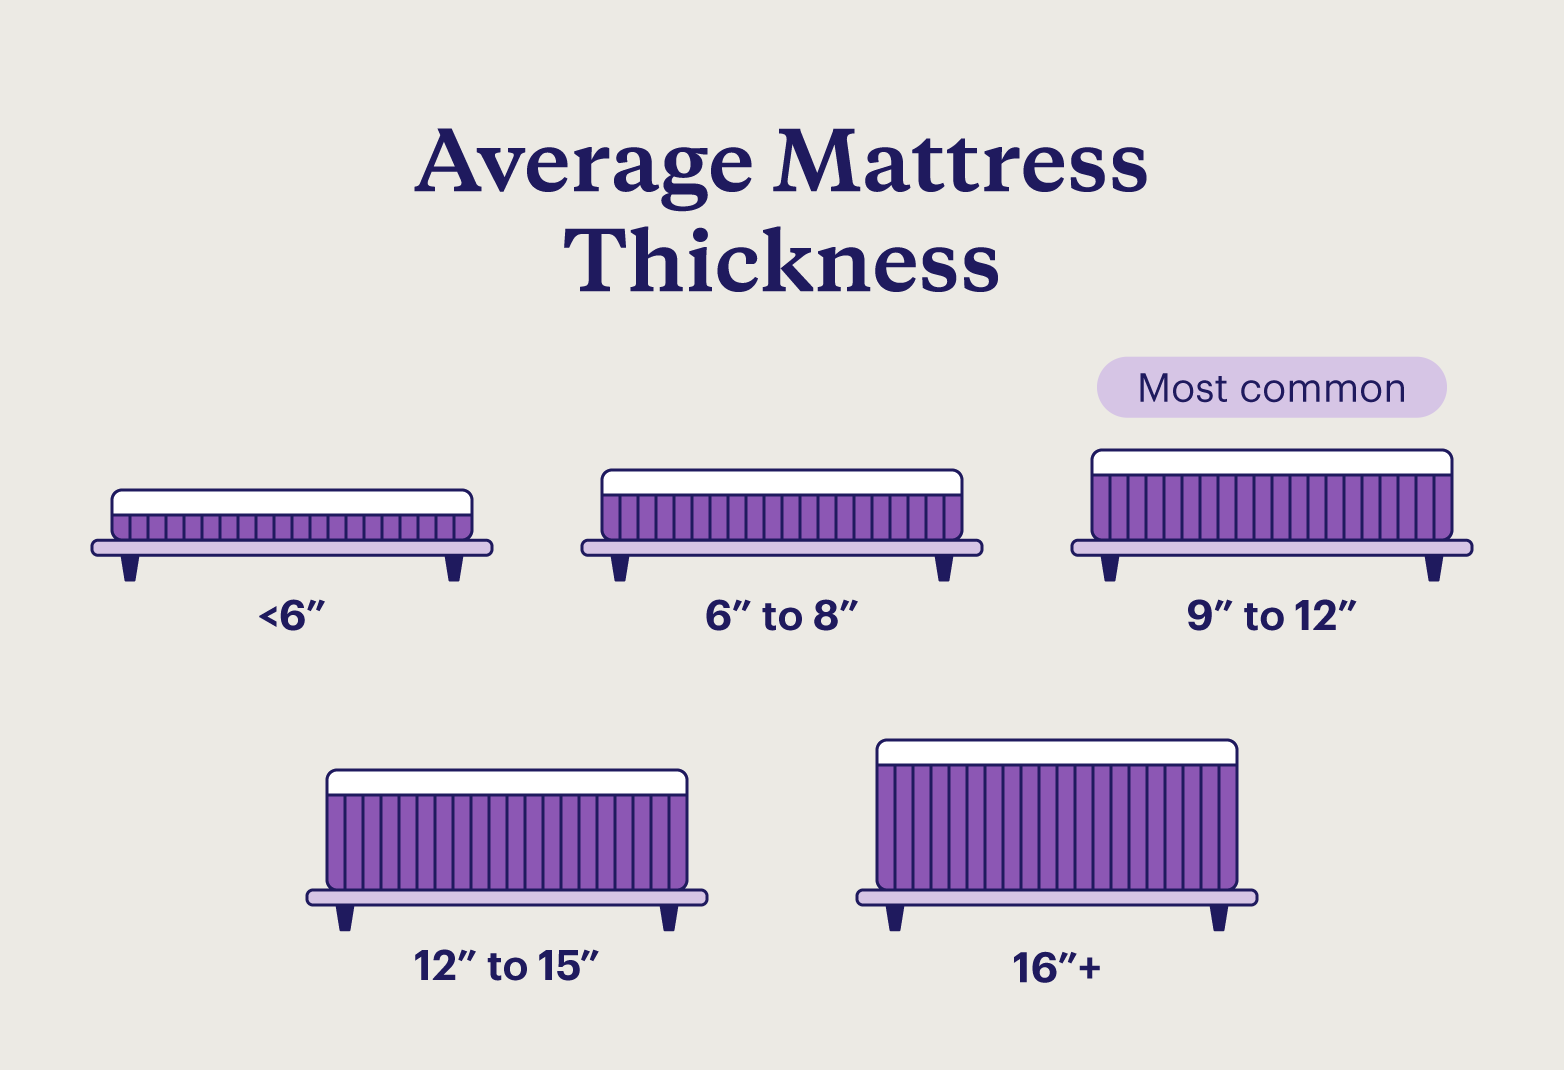 An illustration comparing the different mattress thickness options.